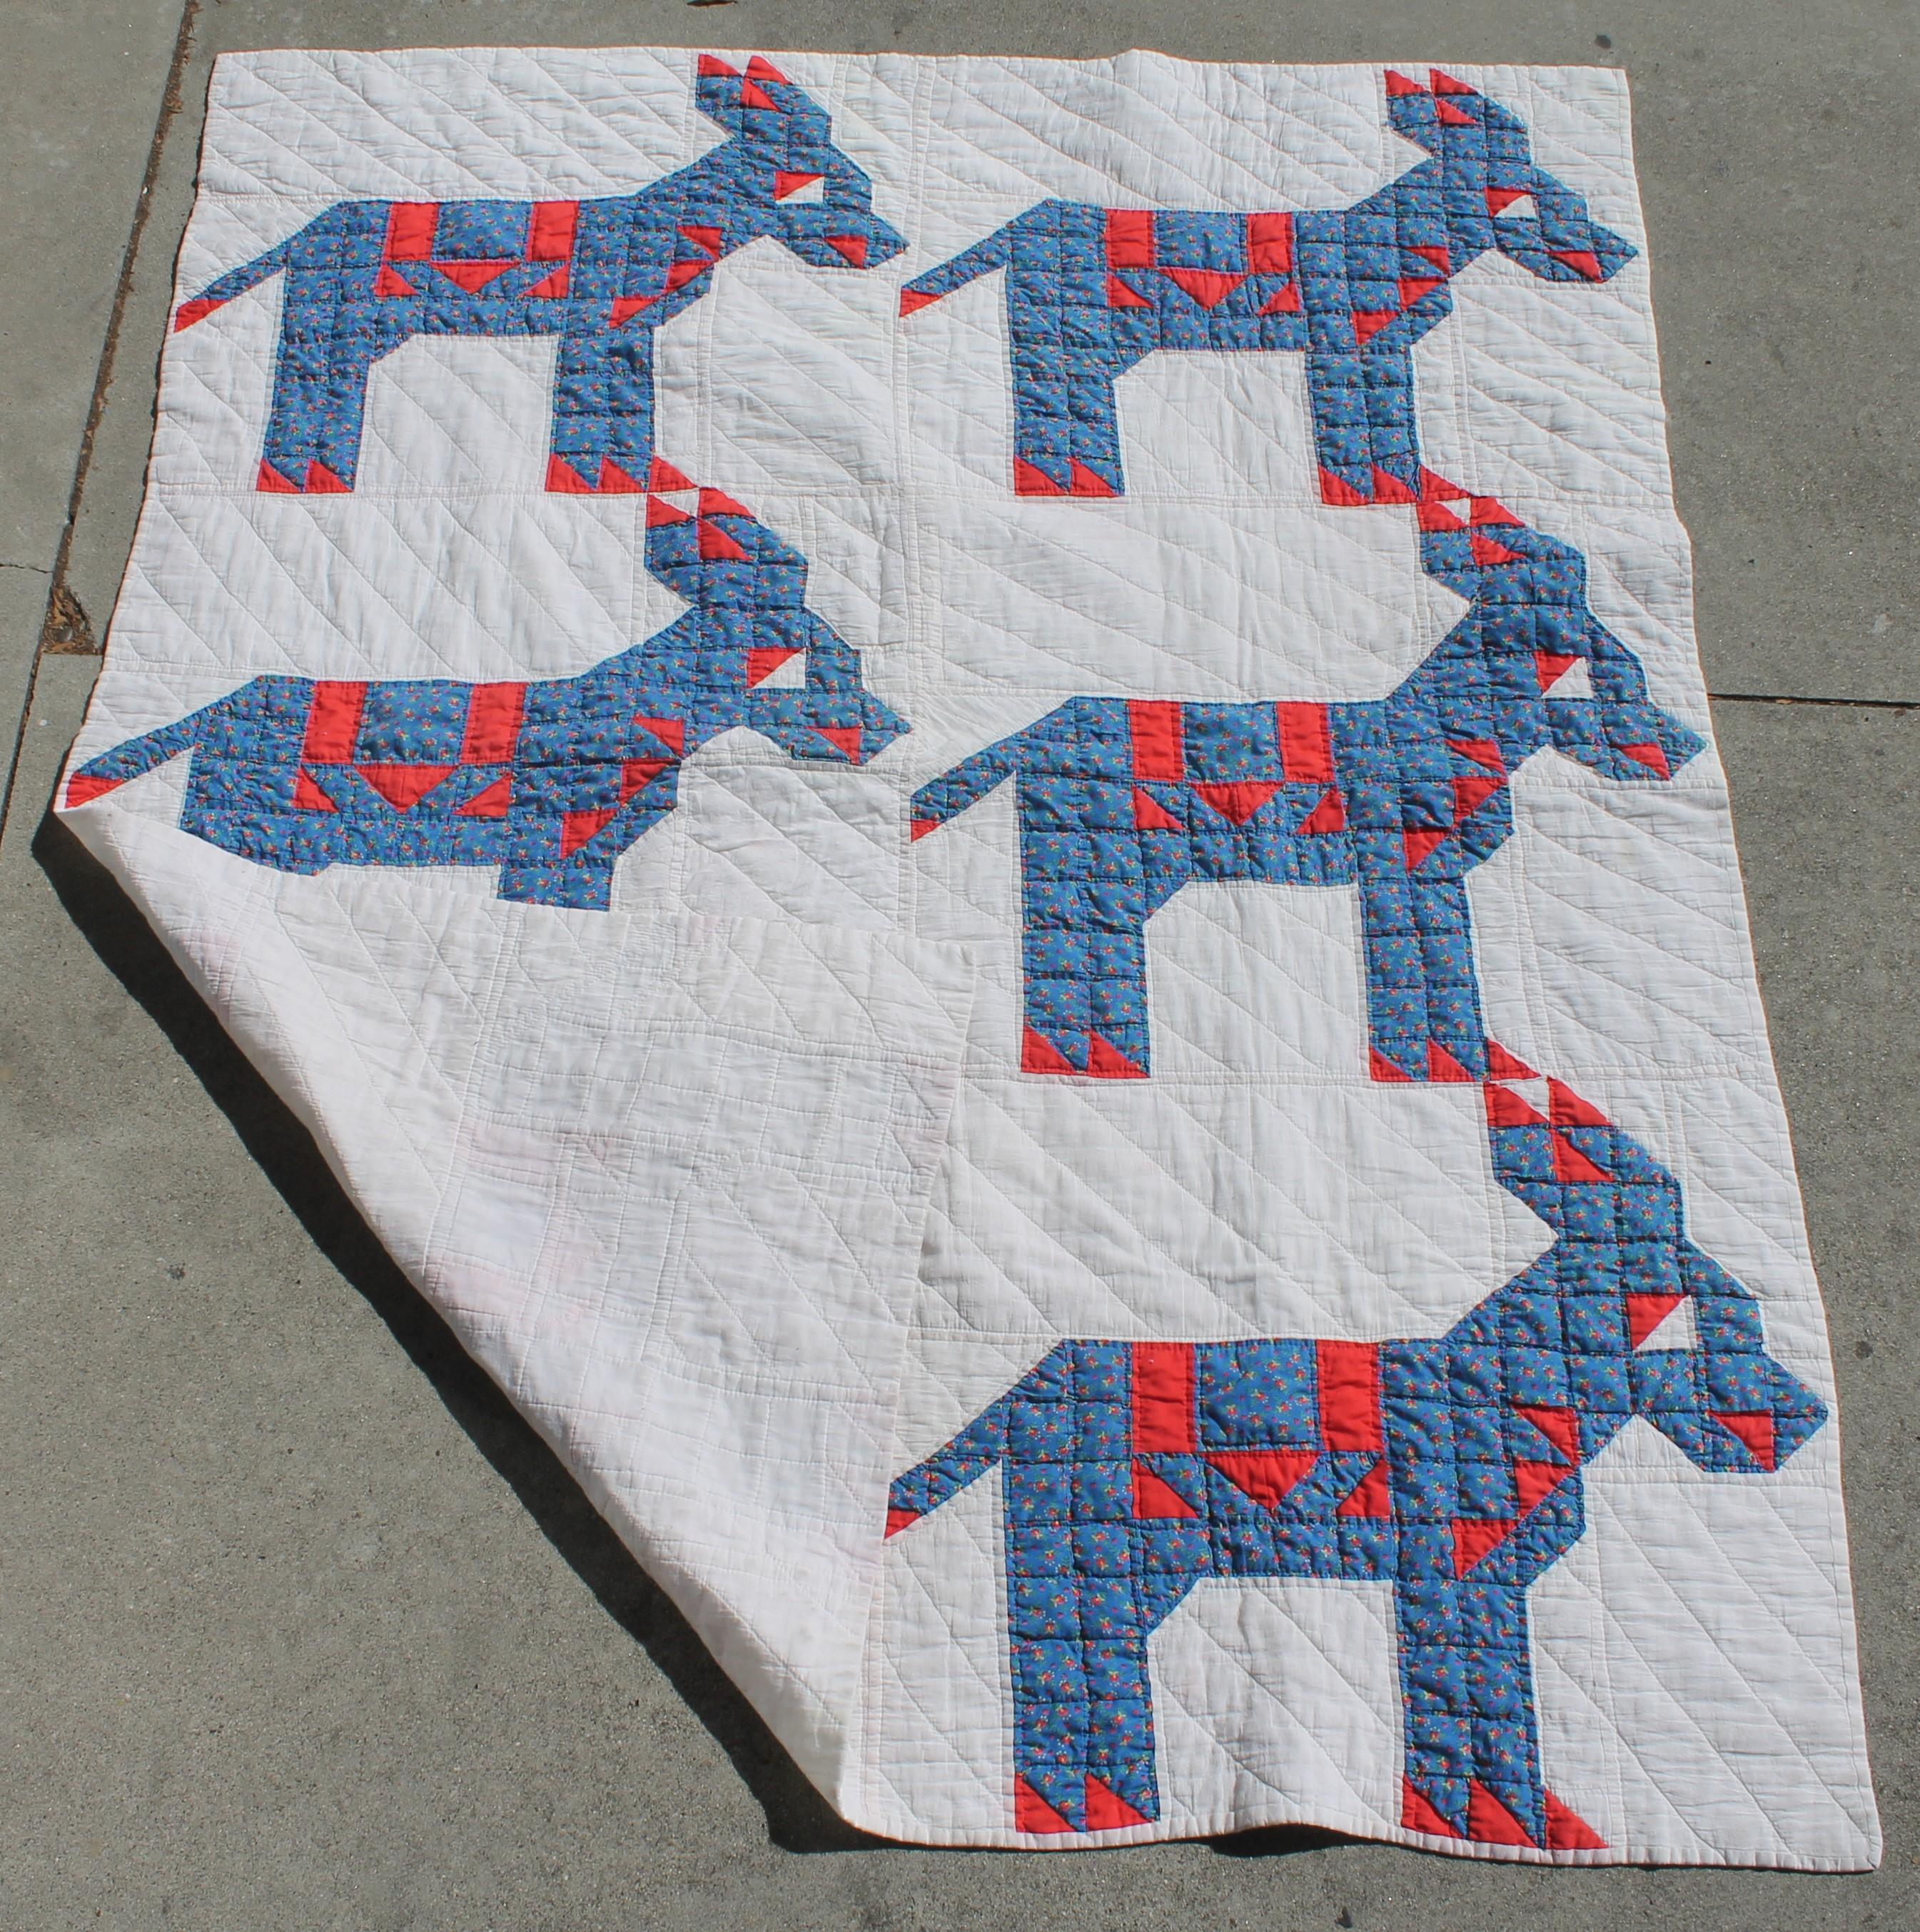 This folky red, white and blue donkey quilt is in good condition and is a rare pattern to find.